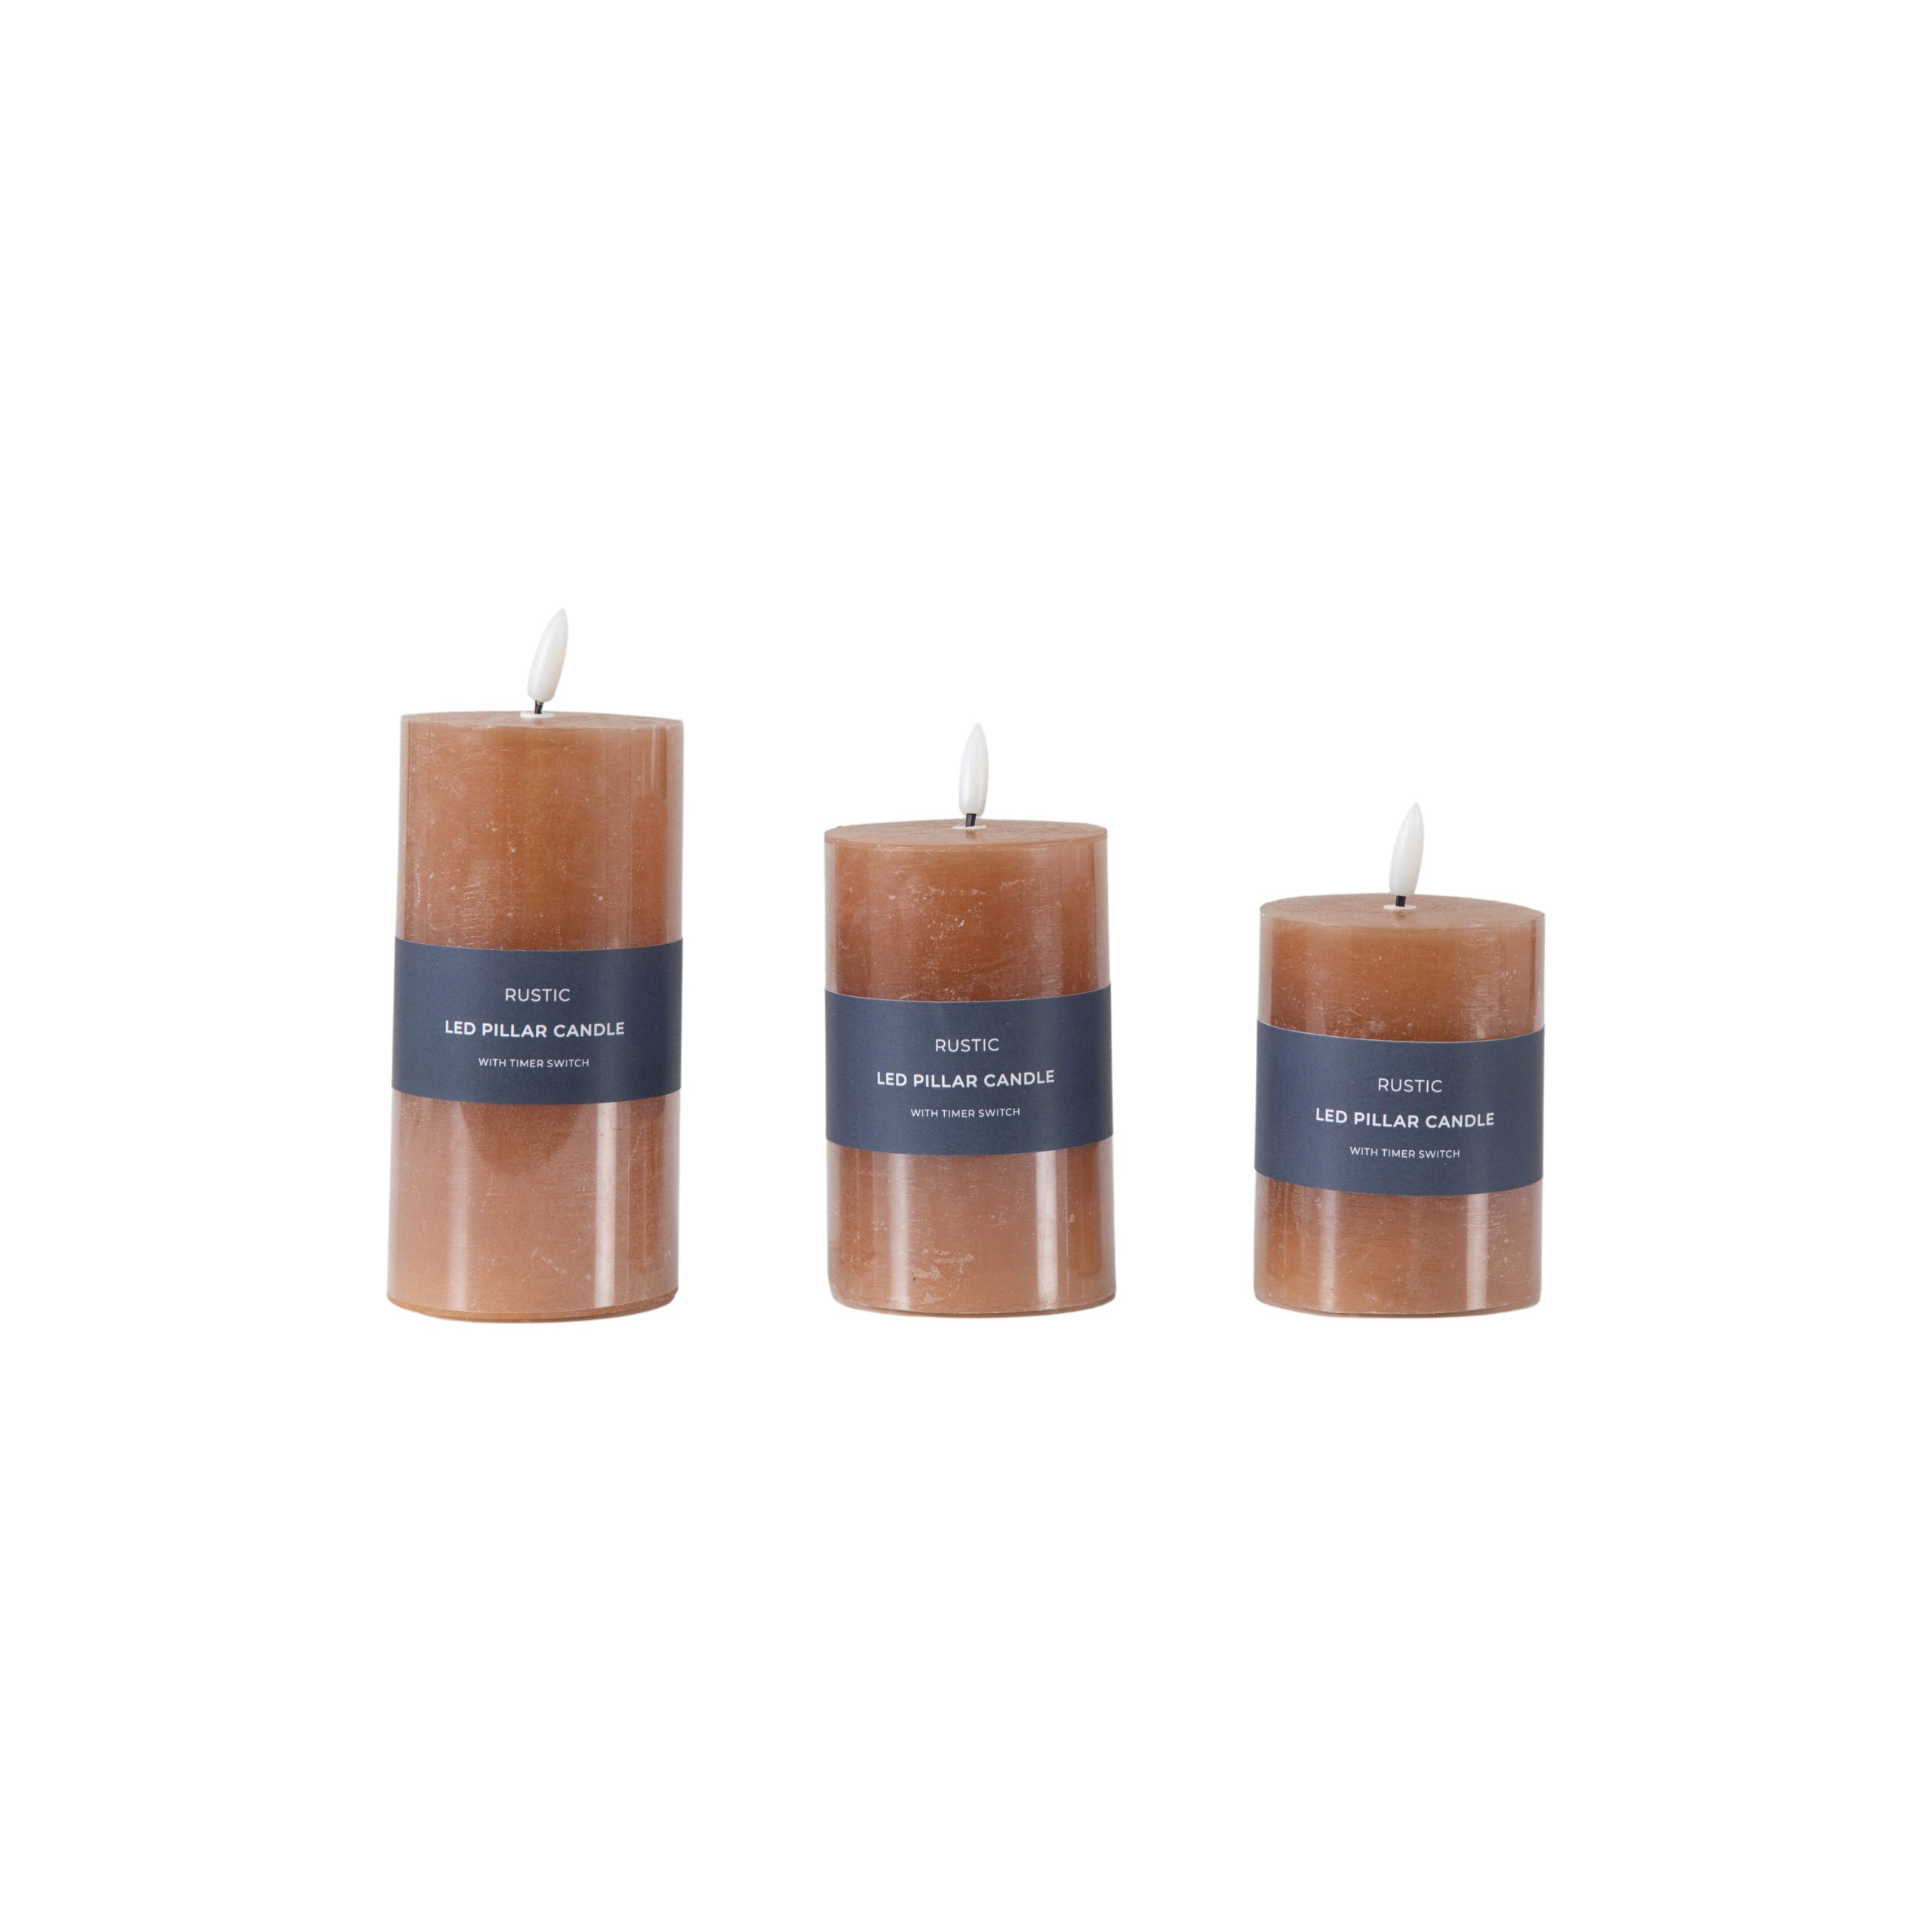 Gallery Direct LED Candle Rustic Amber (Set of 3)